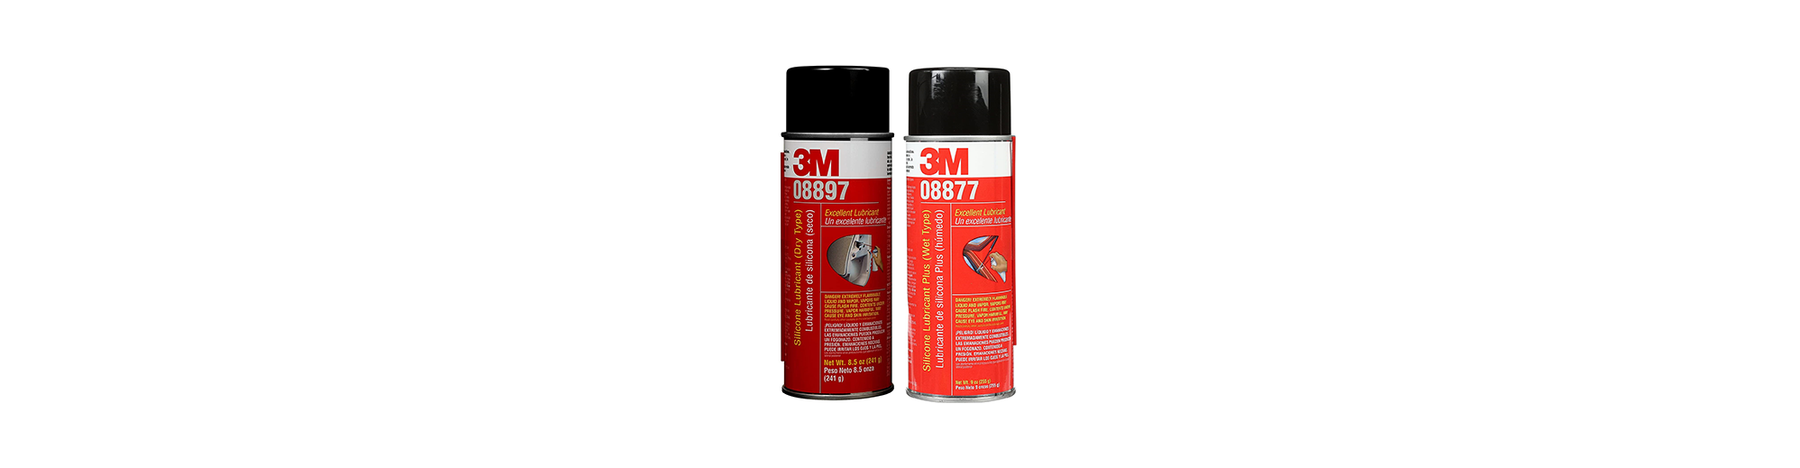 3M Silicone Lubricant – The Difference Between Wet Lubricant and Dry Lubricant